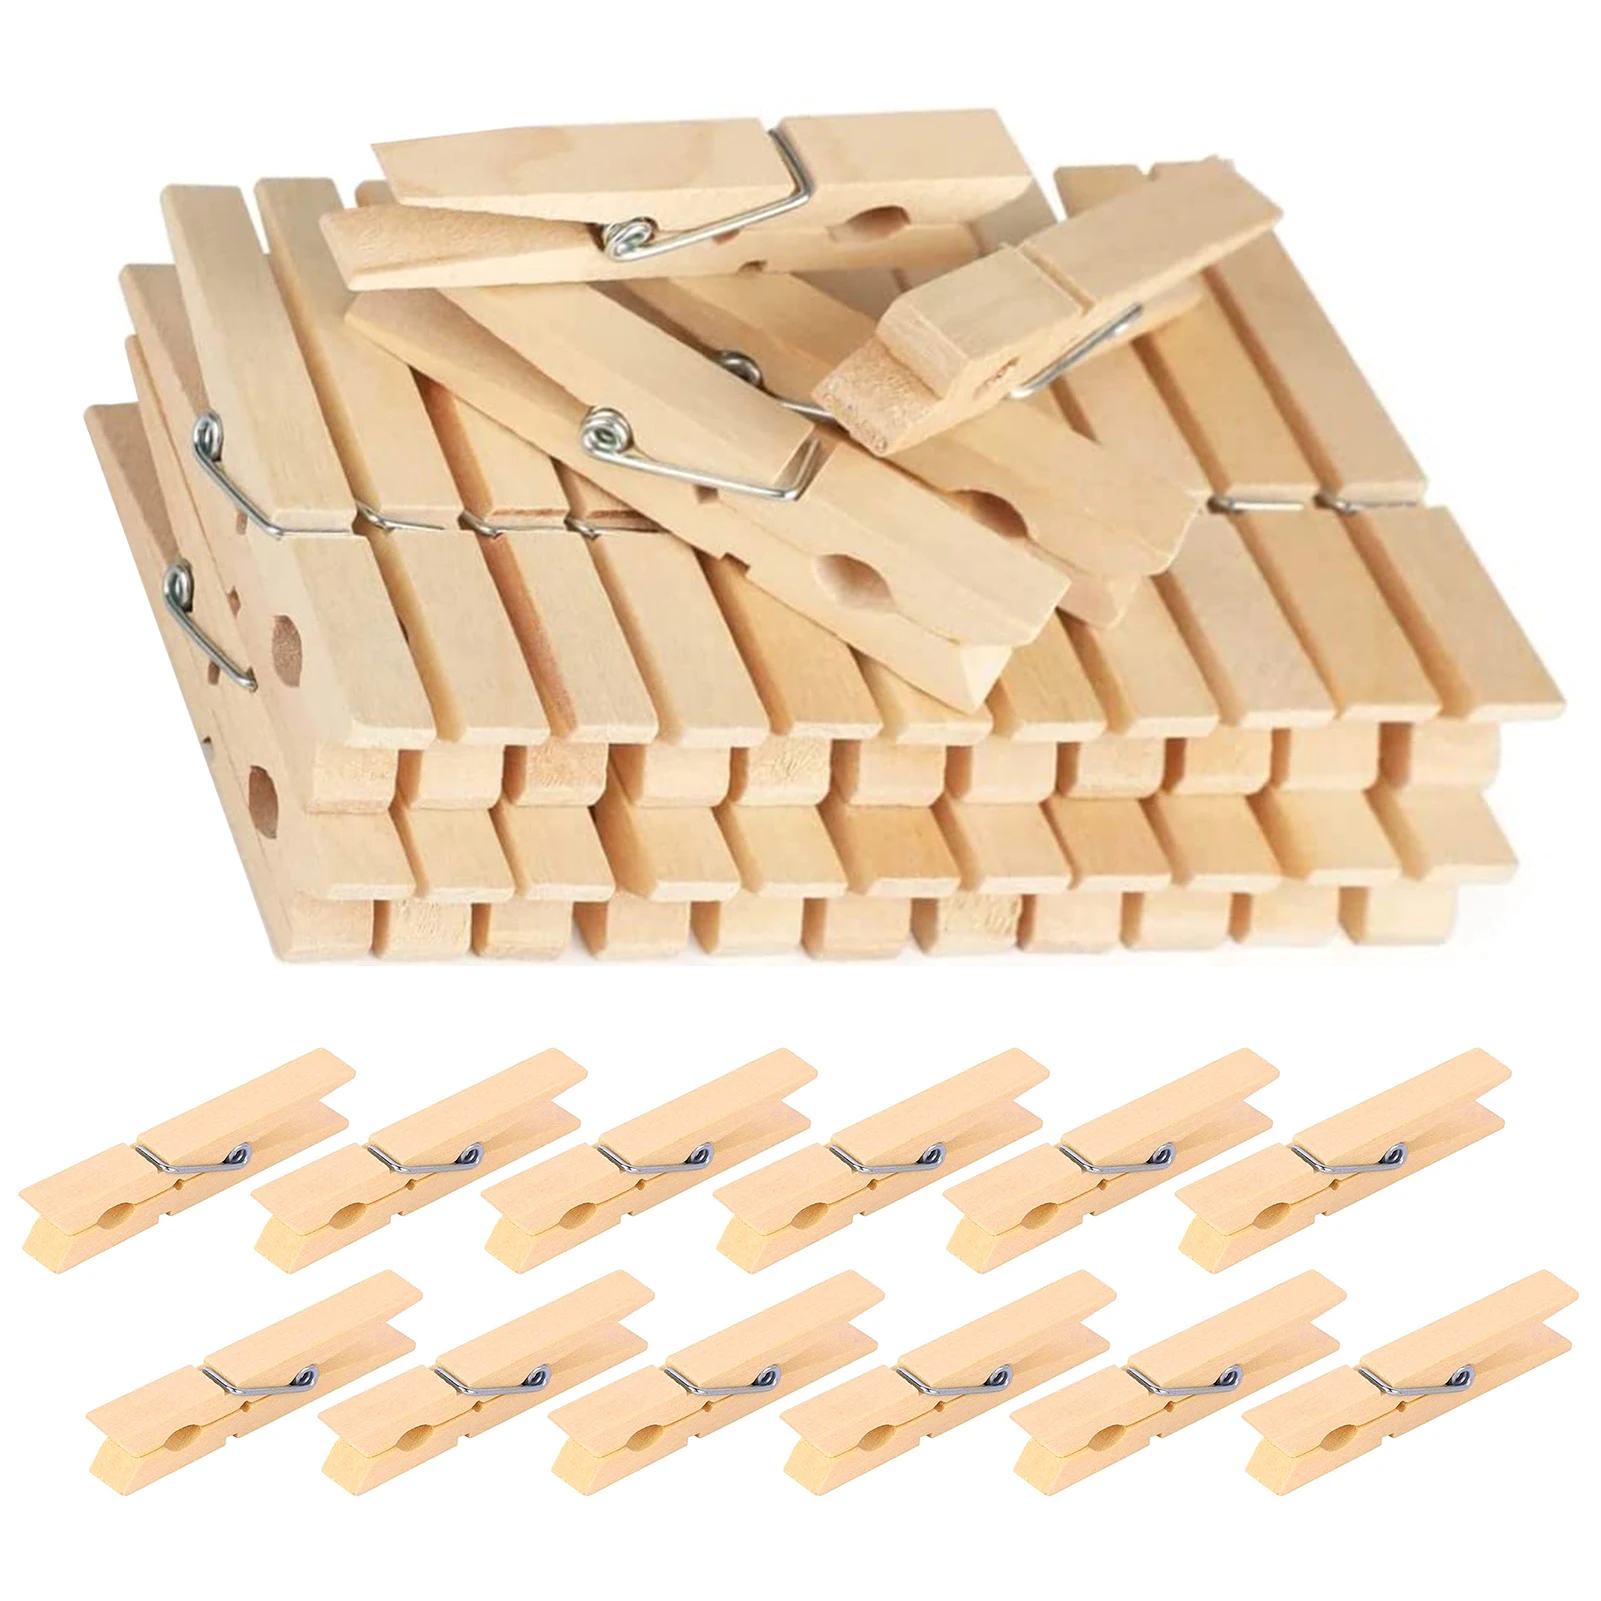 Wooden Clips Natural Wooden Small Picture Clips For Crafts 50 PCS Mini Wooden Clothespins Clothes Pins For Craft Wooden Clips